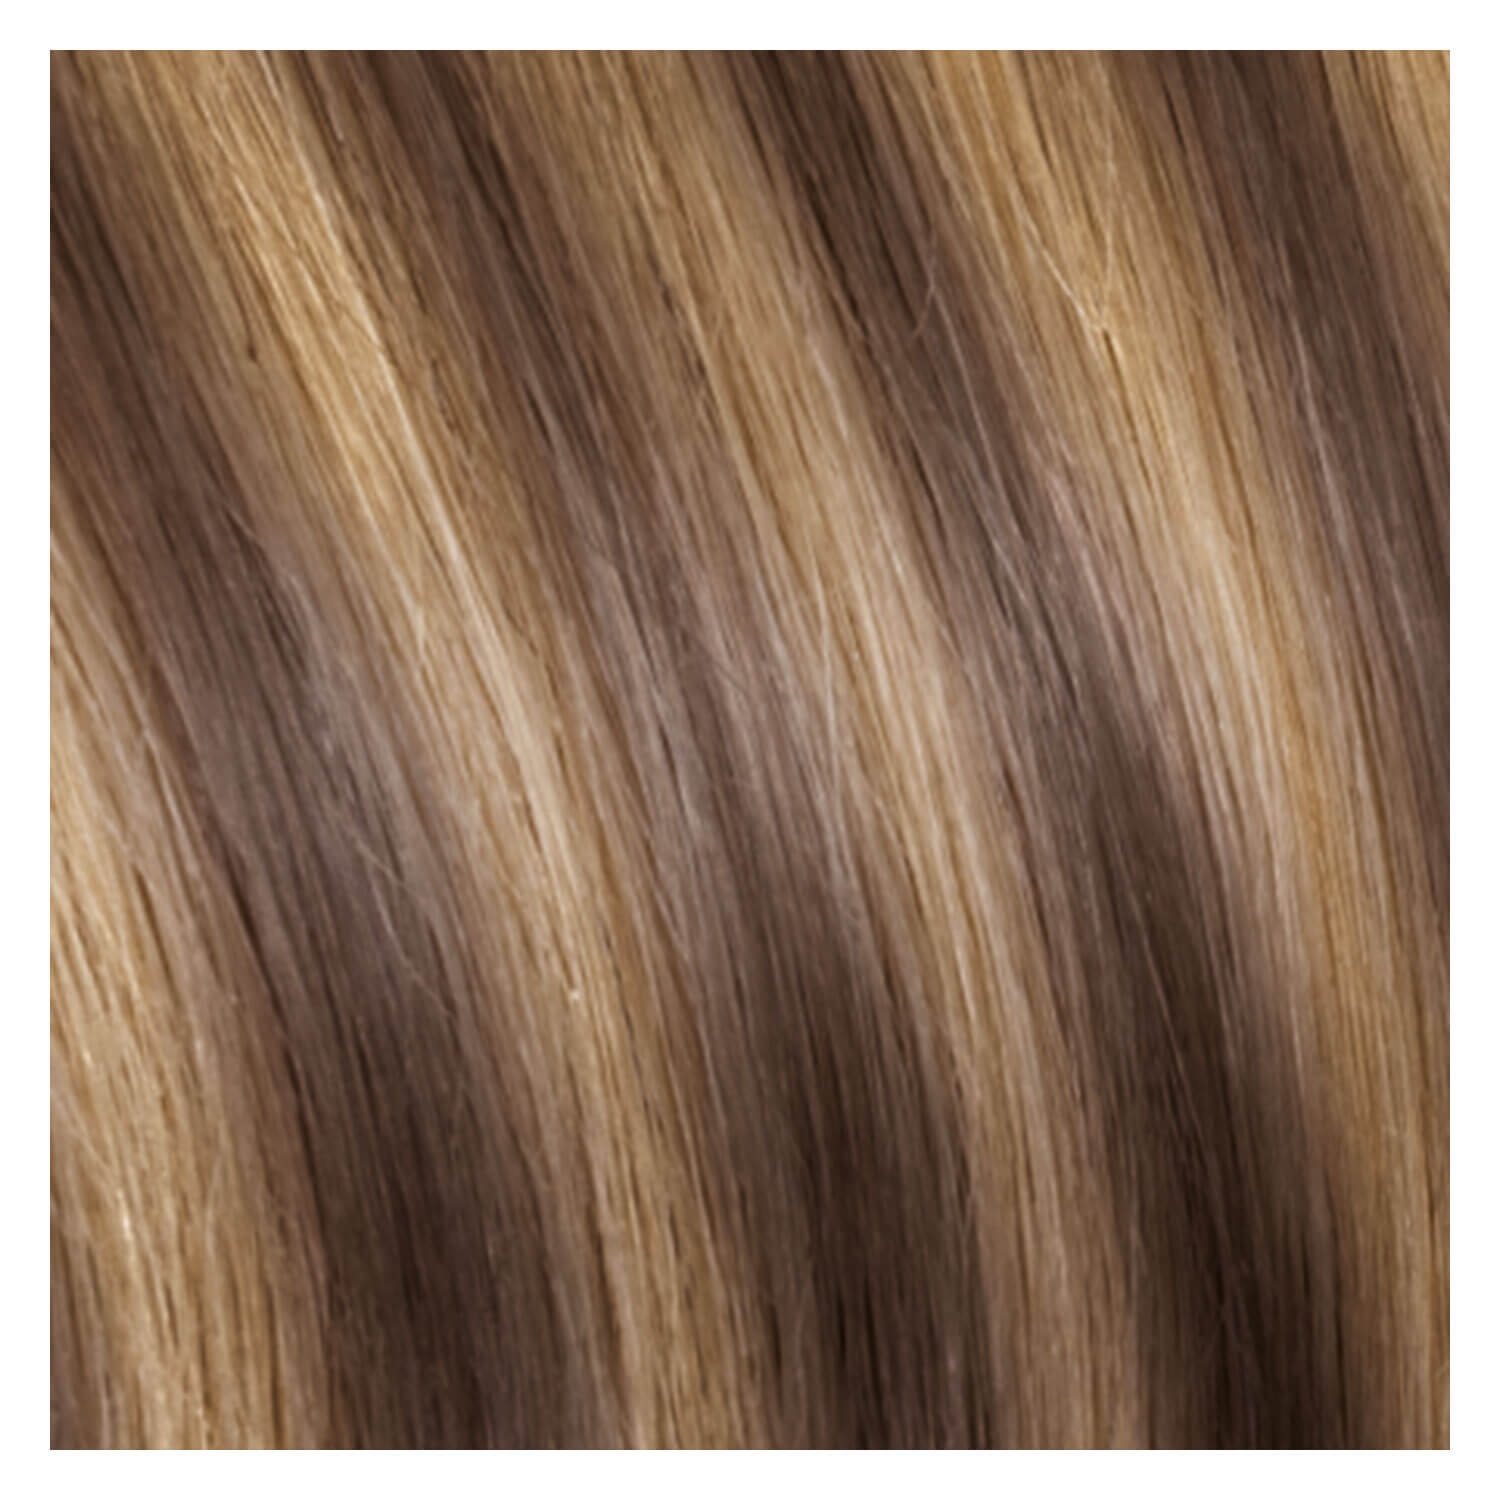 Product image from SHE Clip In-System Hair Extensions - 9-teiliges Set M8/26 Dunkelblond/Honigblond 50/55cm